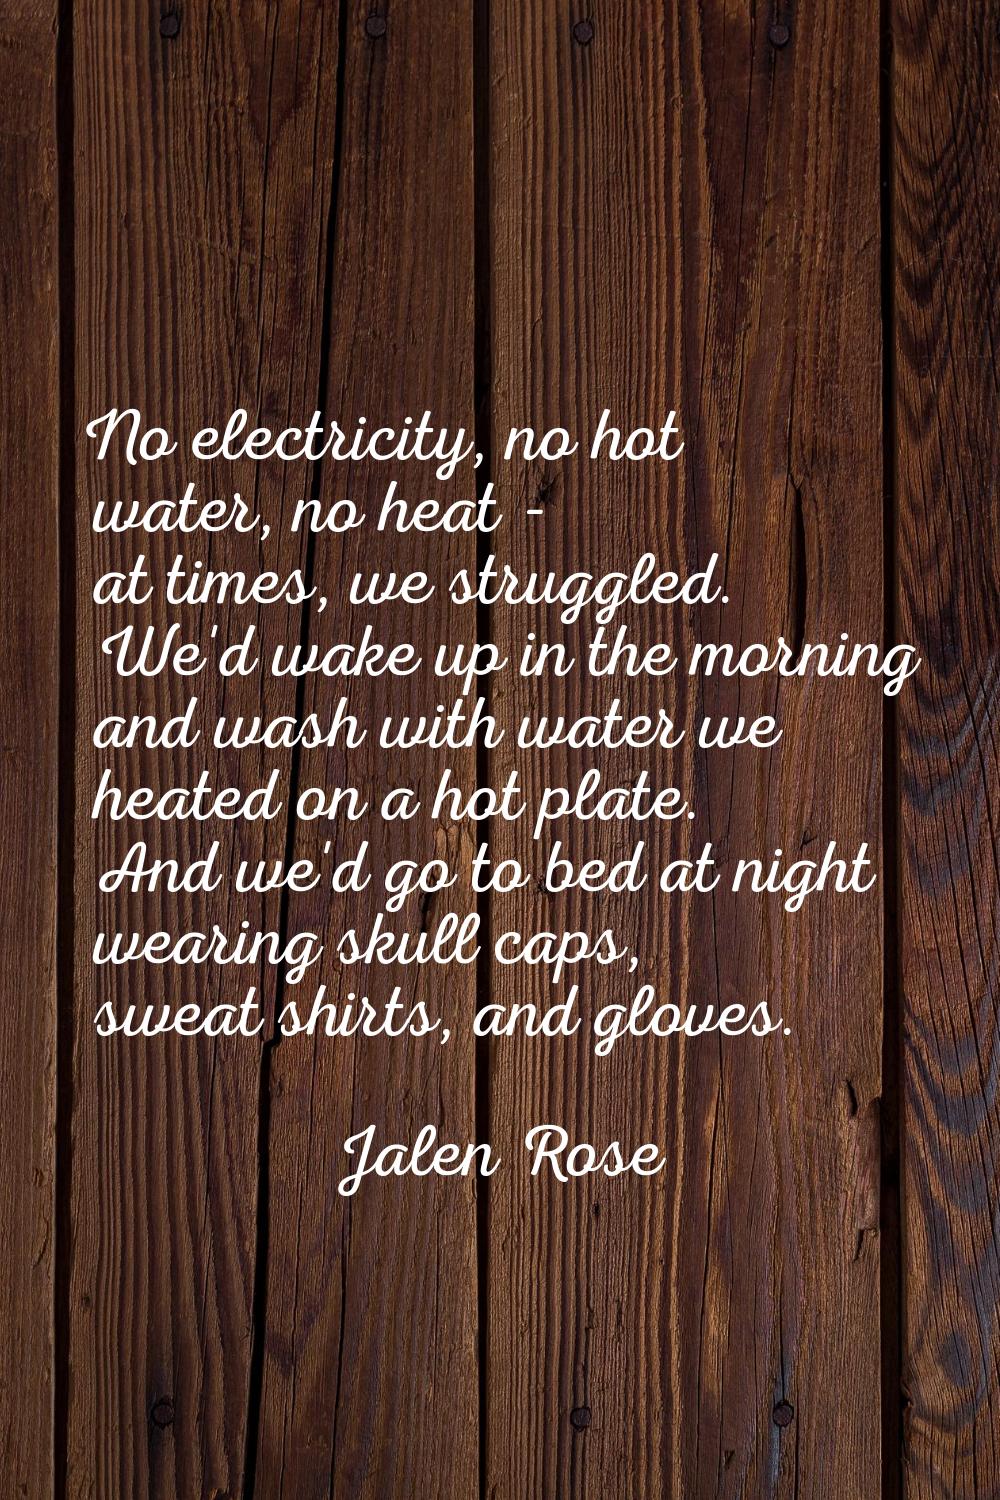 No electricity, no hot water, no heat - at times, we struggled. We'd wake up in the morning and was